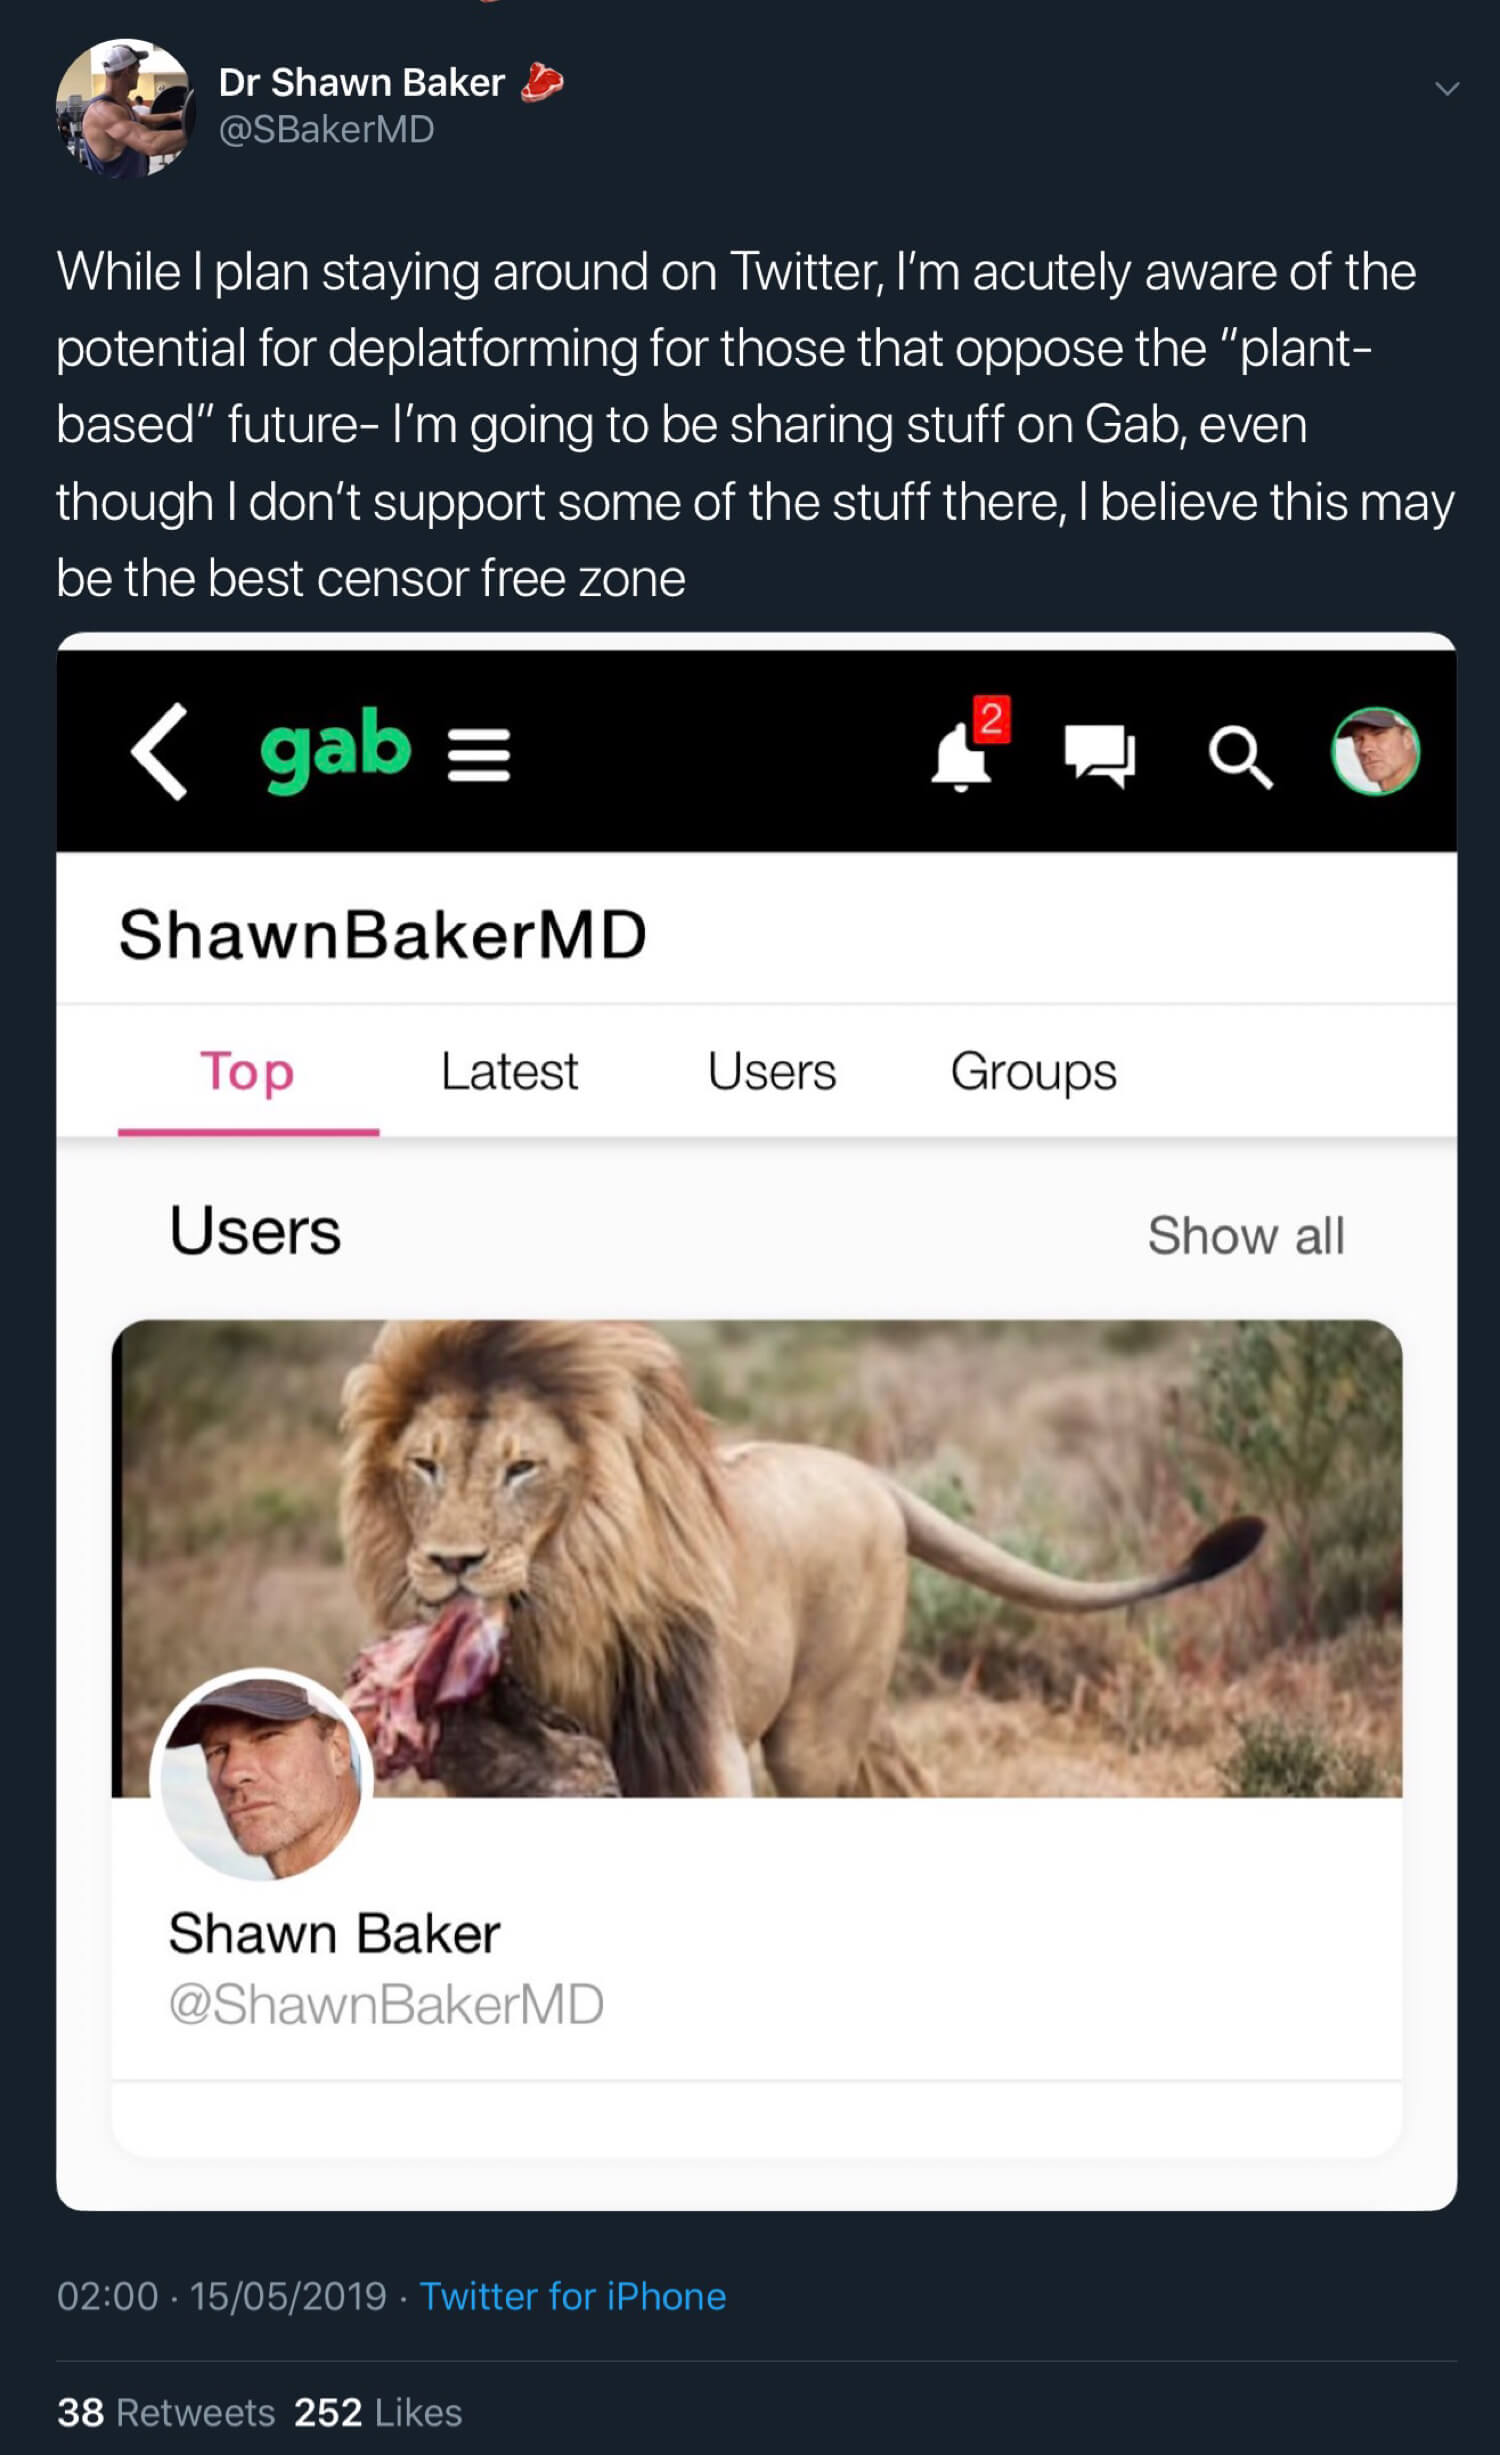 Dr. Shawn Baker announcing that he’s going to start sharing content on Gab in response to the deplatformings on Facebook.